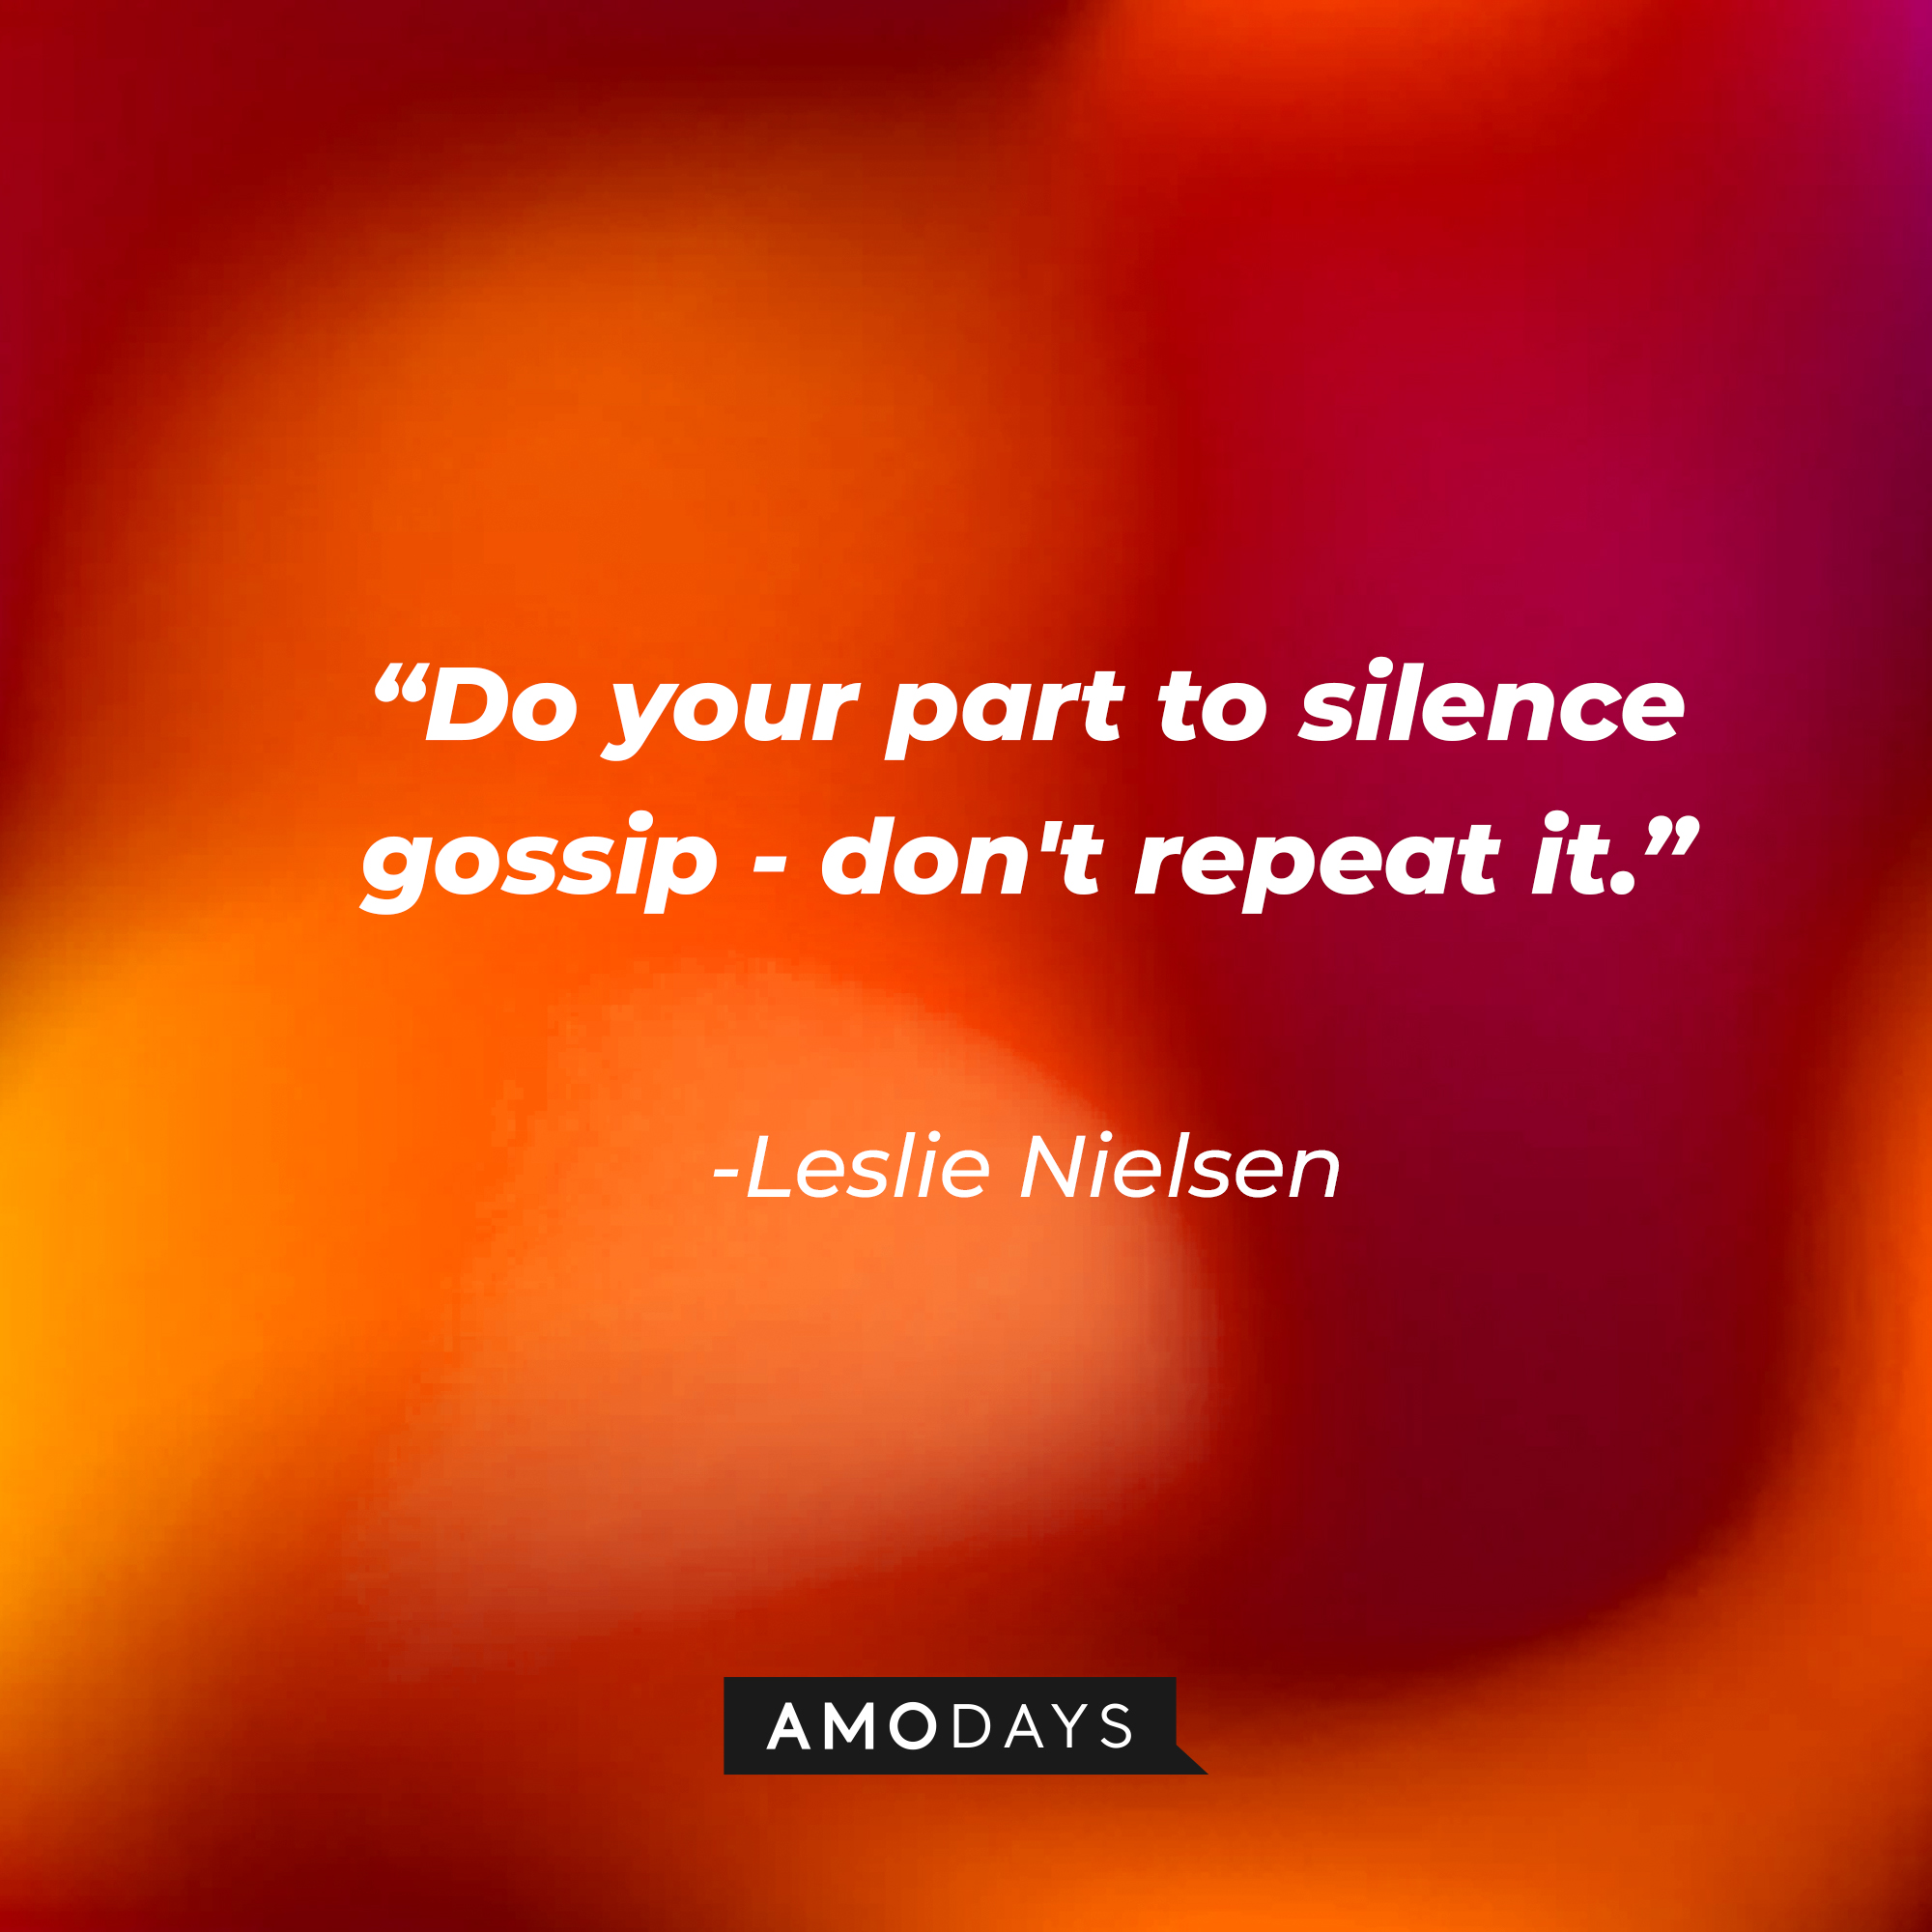 Leslie Nielsen's quote: "Do your part to silence gossip - don't repeat it." | Source: Amodays